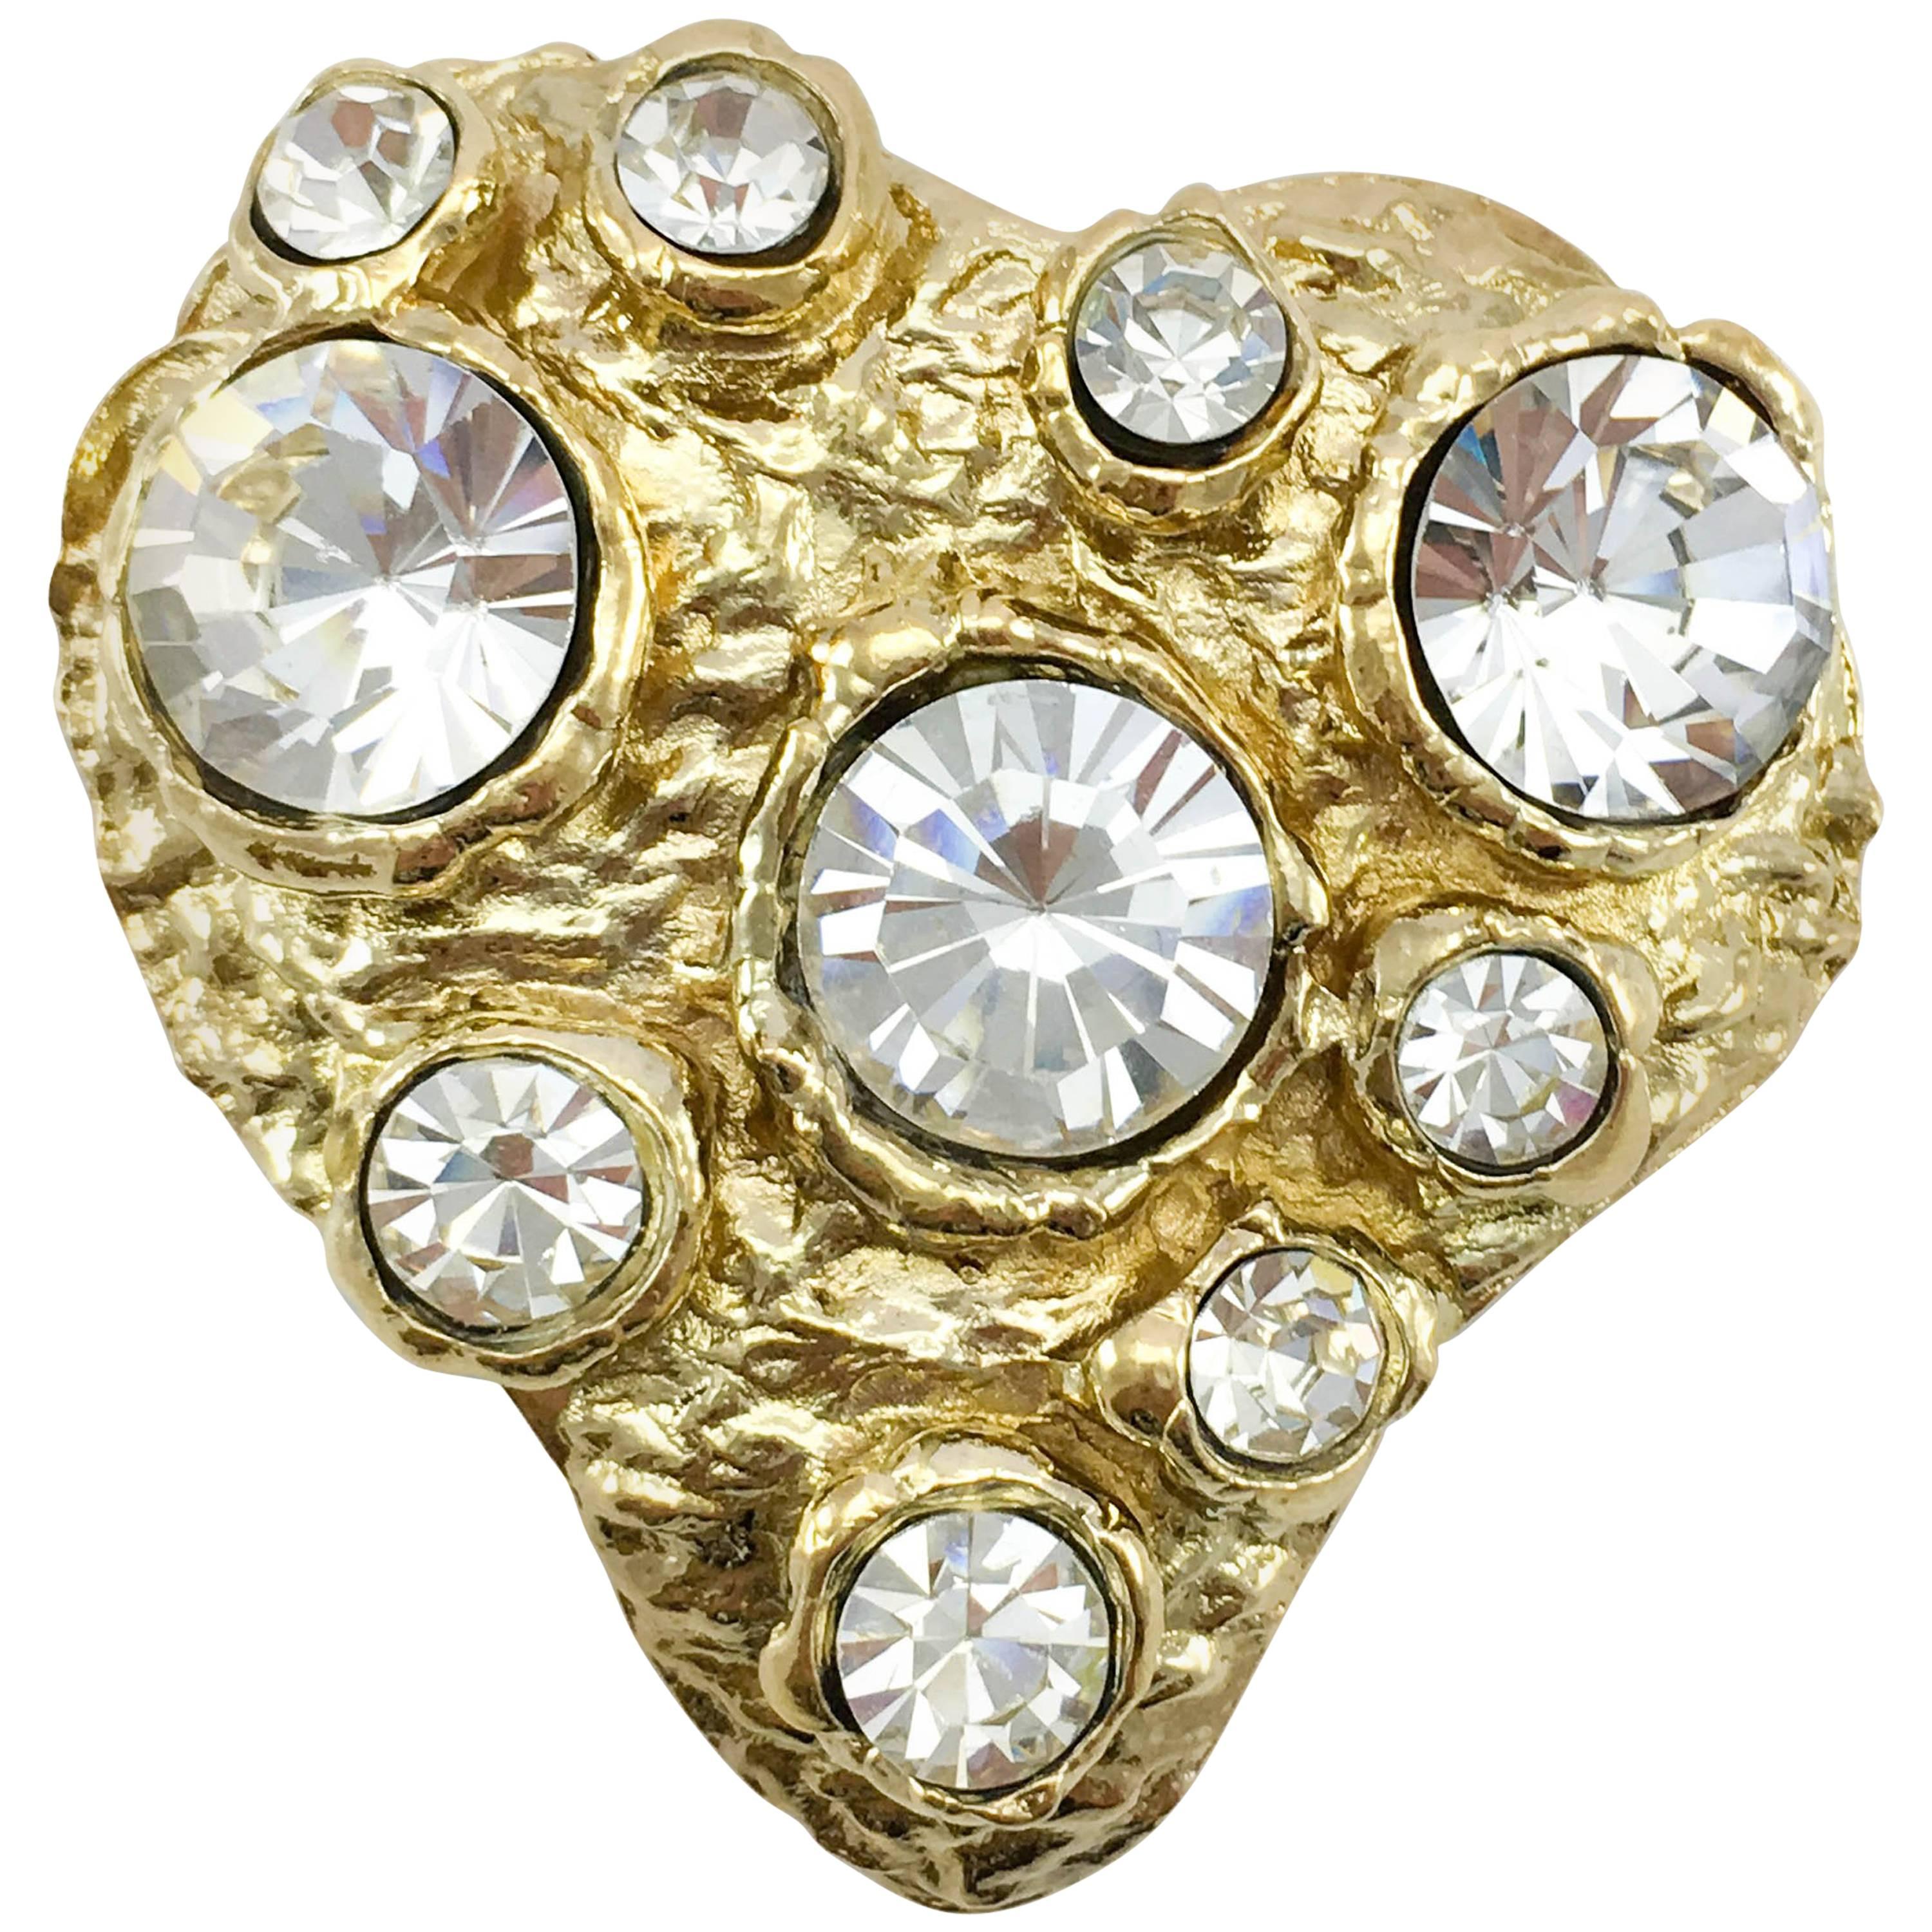 1980s Lacroix Crystal Embellished Gold-Plated Heart Brooch